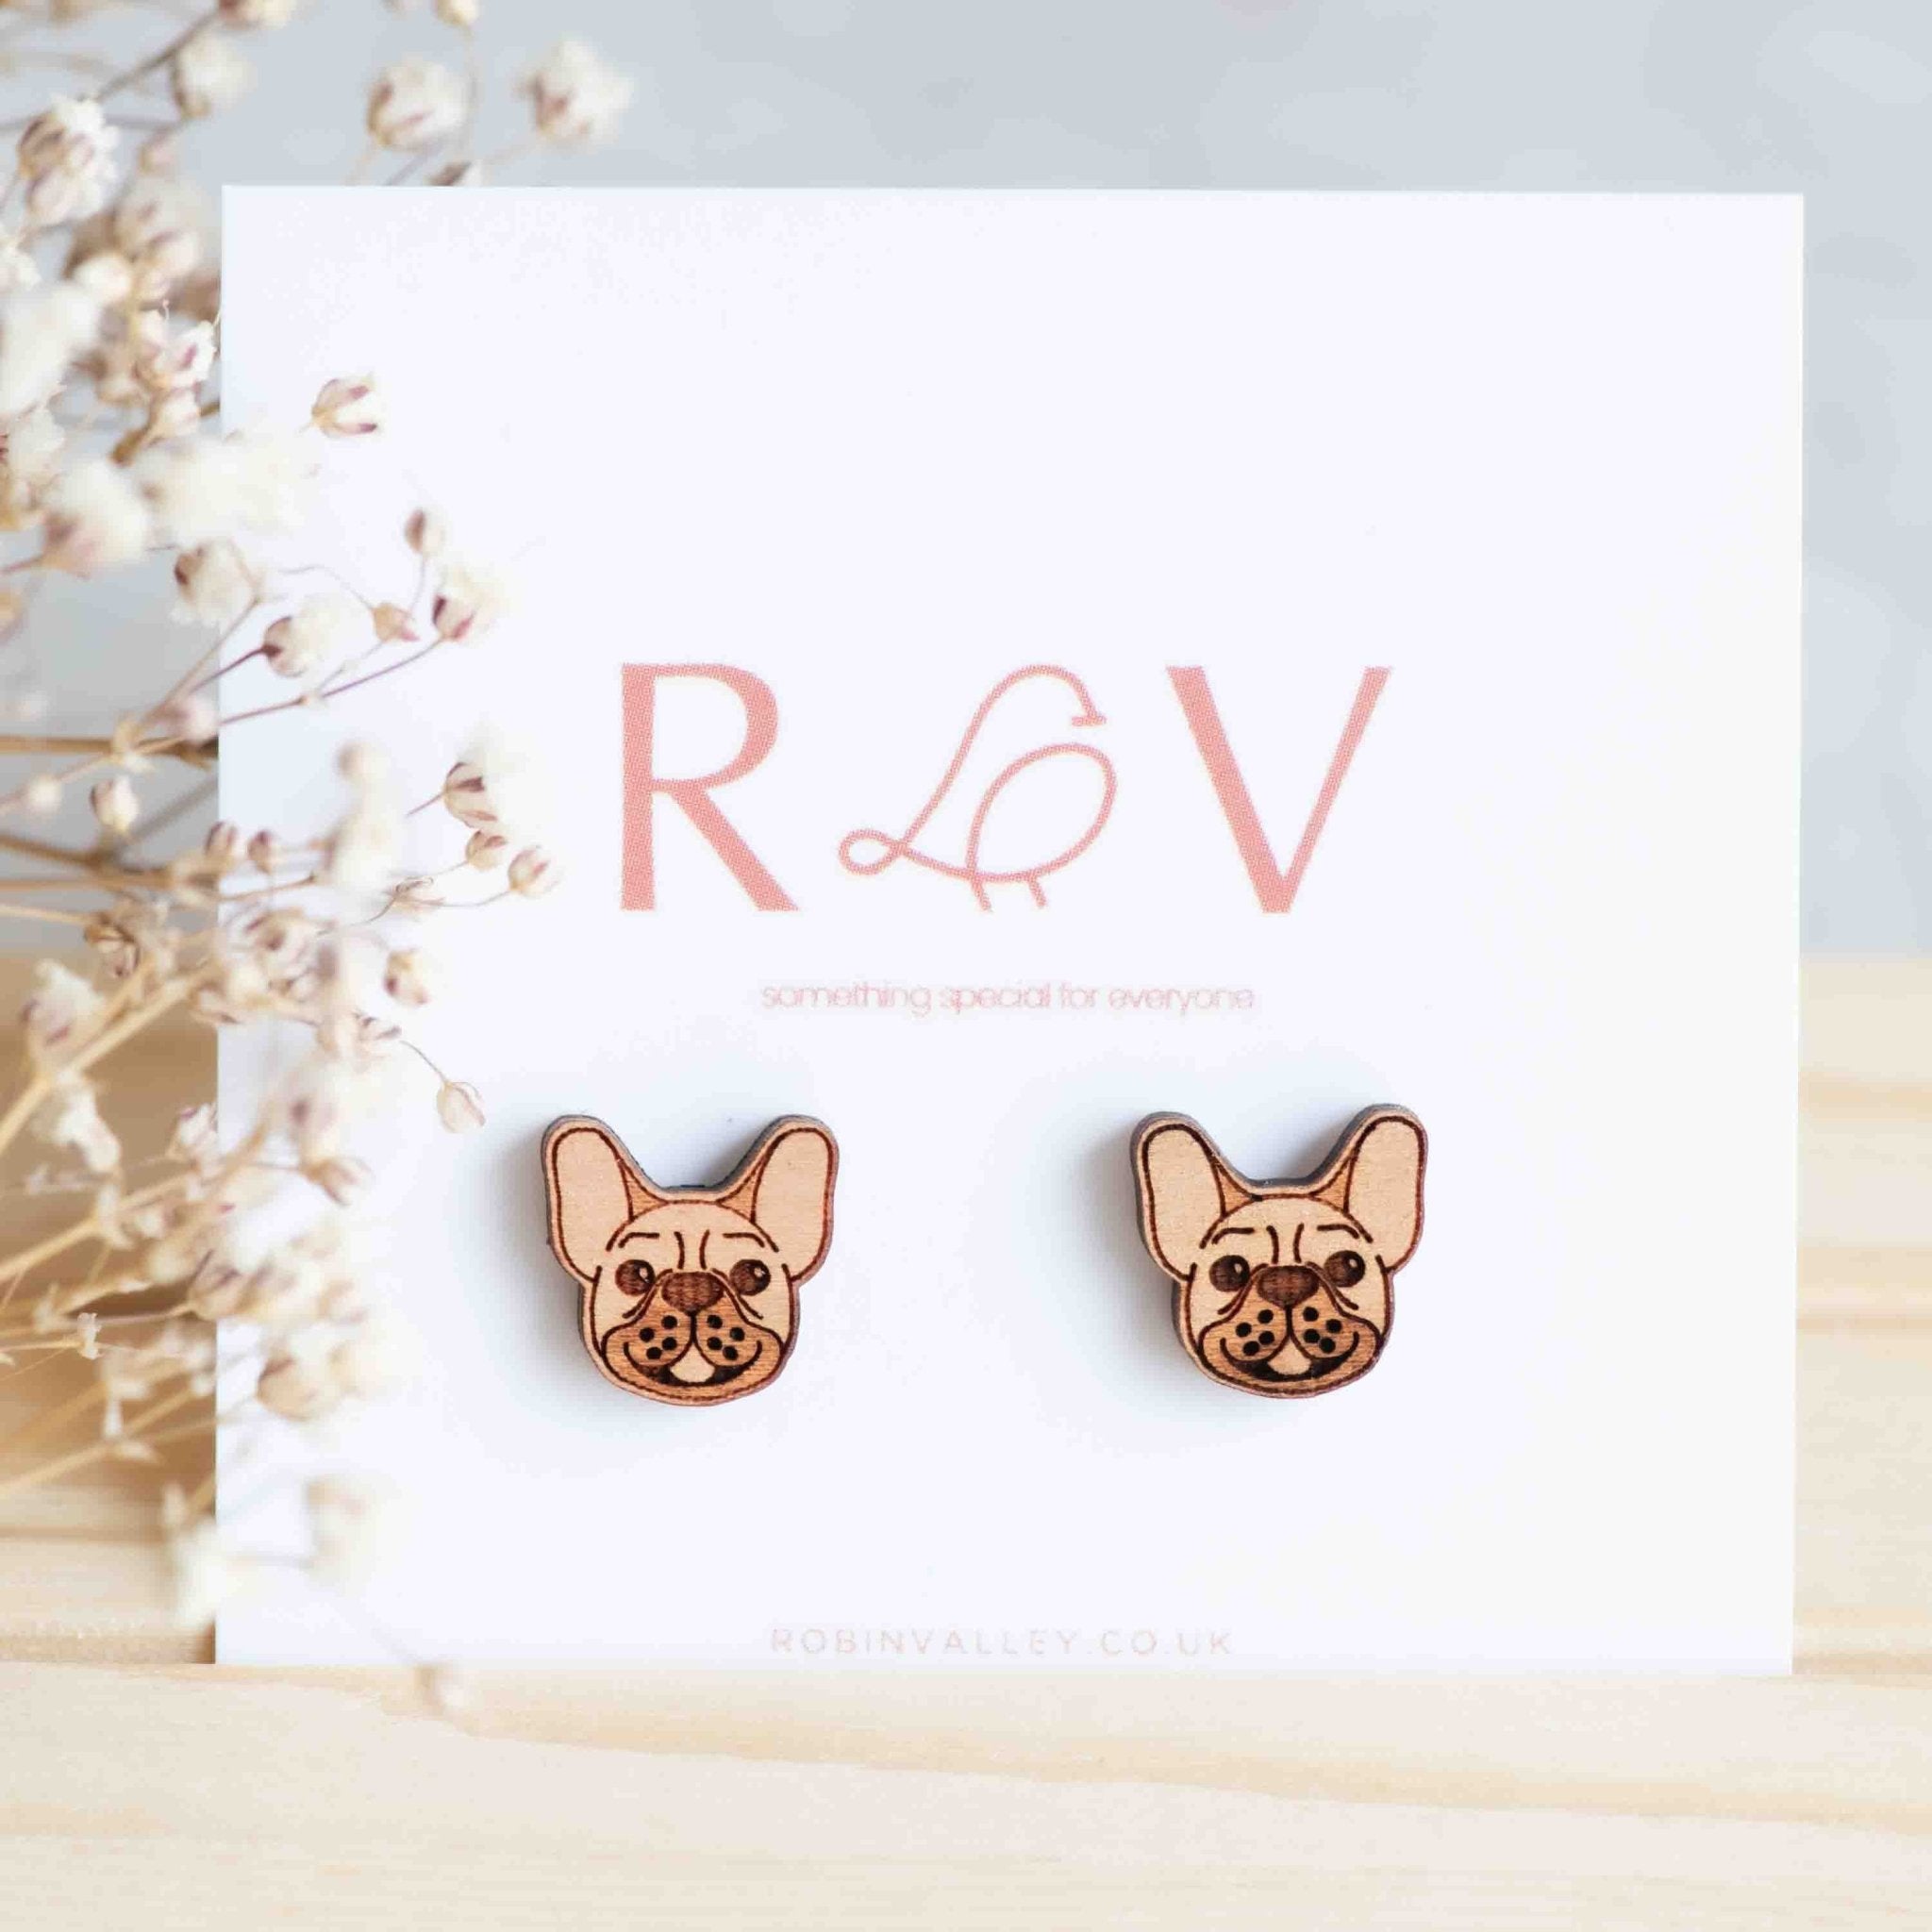 Smiling French Bull Dog Earrings - EL10190 - Robin Valley Official Store